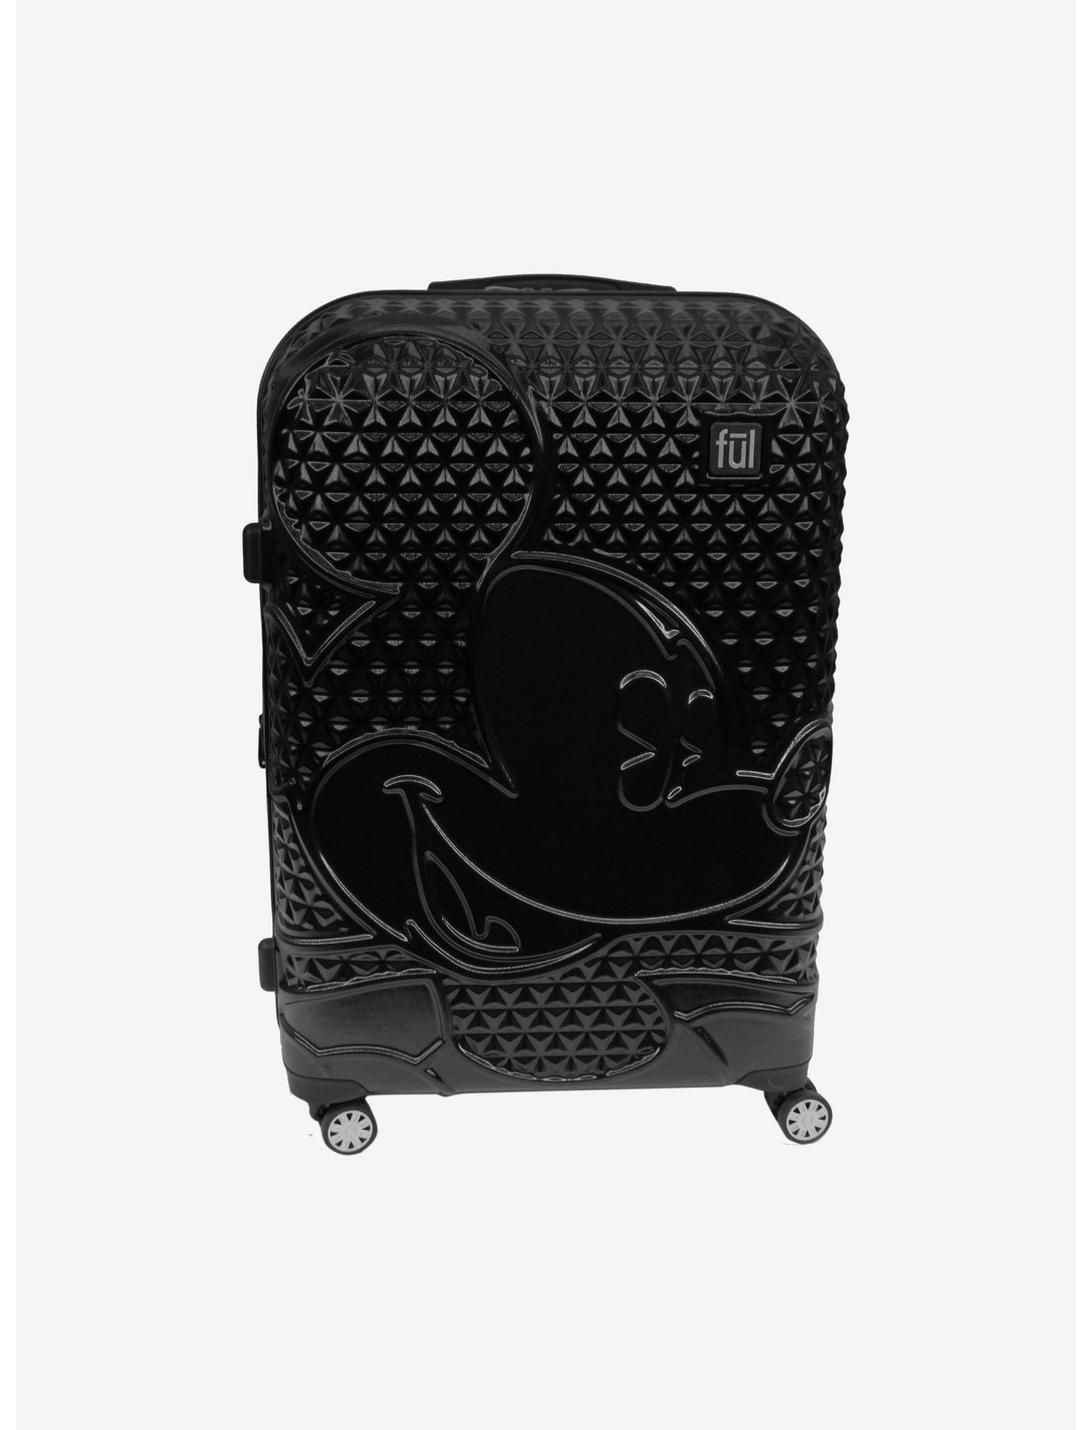 FUL Disney Mickey Mouse 29 Inch Textured Hard Sided Rolling Luggage, , hi-res